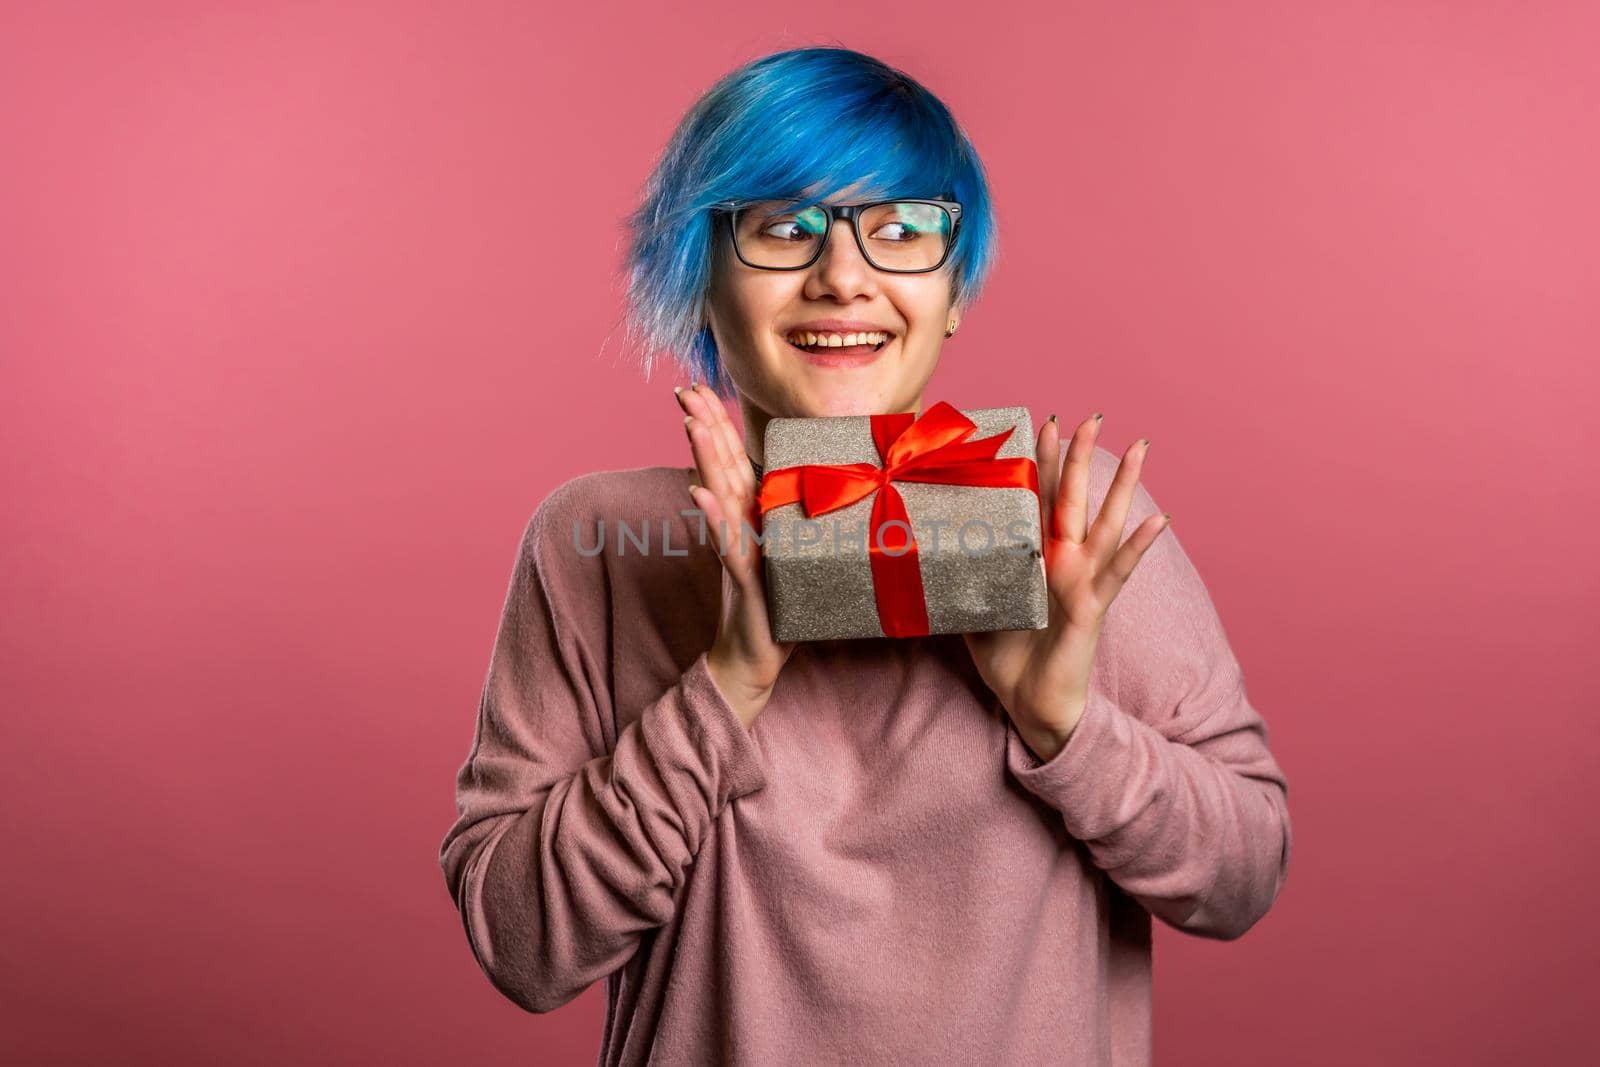 Young unusual woman with blue hair smiling and holding gift box on pink studio background. Girl cozy sweater and glasses. Christmas mood. by kristina_kokhanova